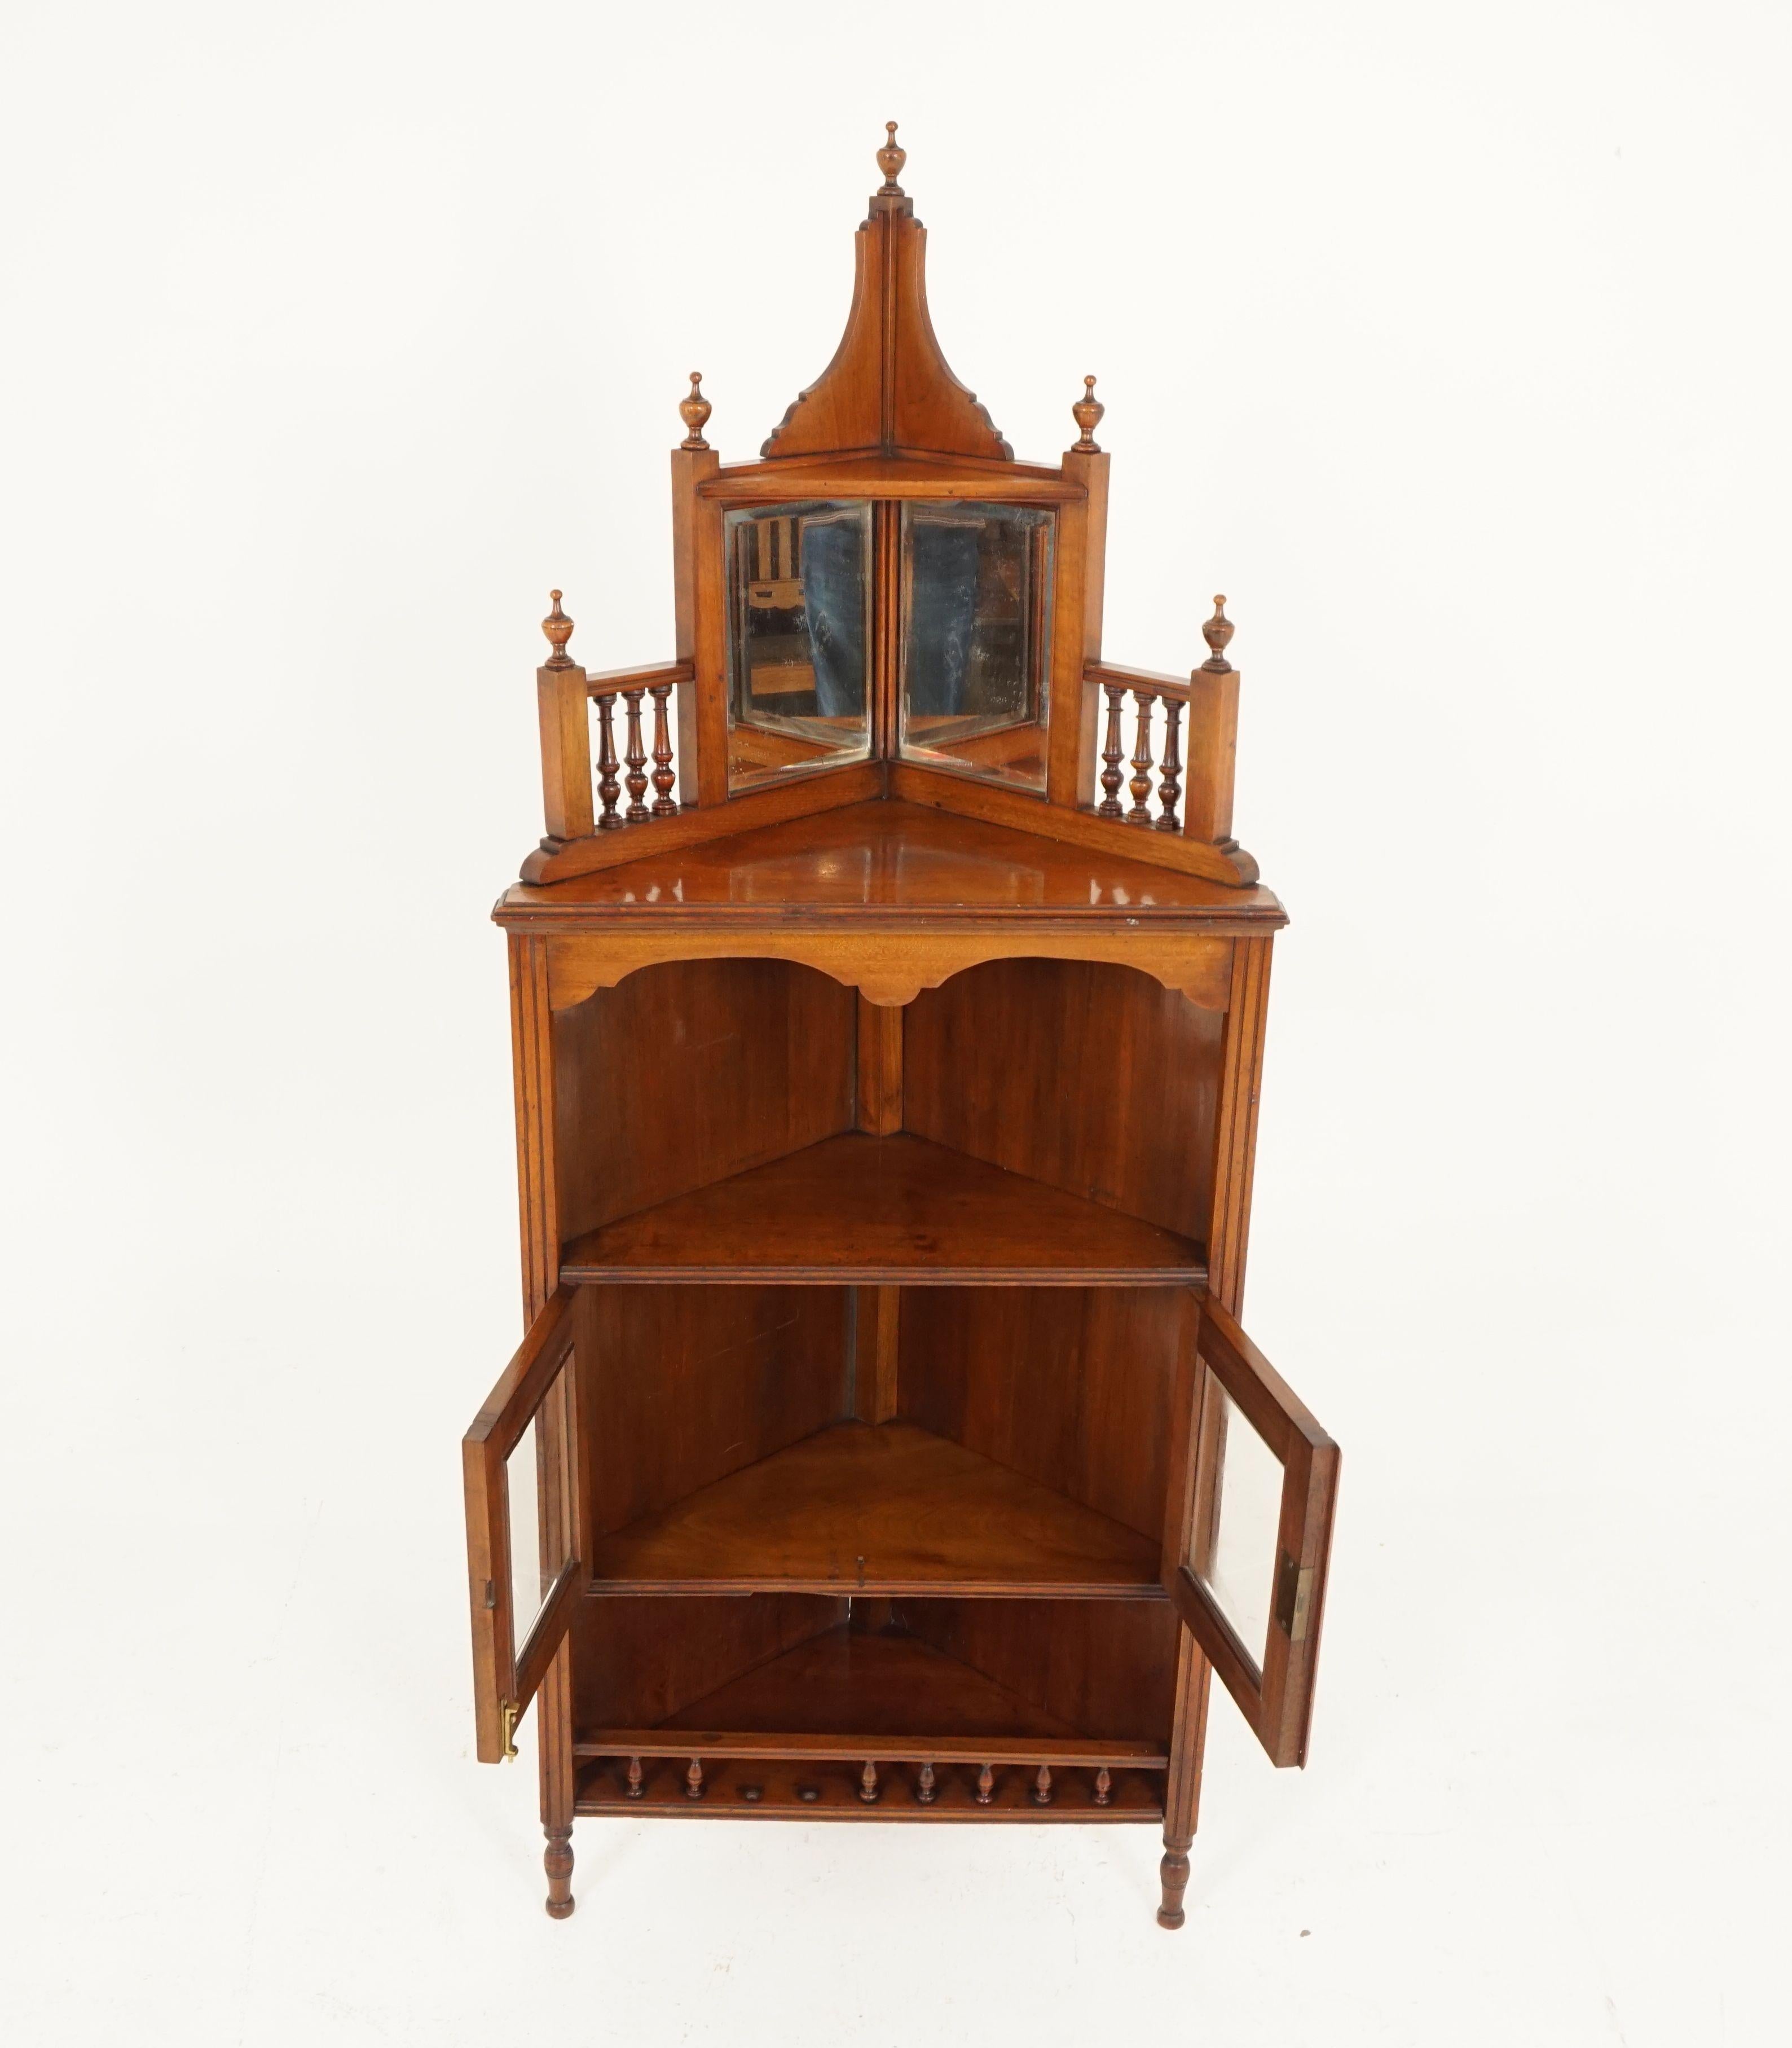 Antique Victorian standing corner cabinet, walnut, mirror back, Scotland 1880, H156

Scotland, 1880
Solid walnut
Original finish
Finial pediment to the top
Shelf below with finials on the ends
Pair of beveled mirrors with spindle ends and capped off